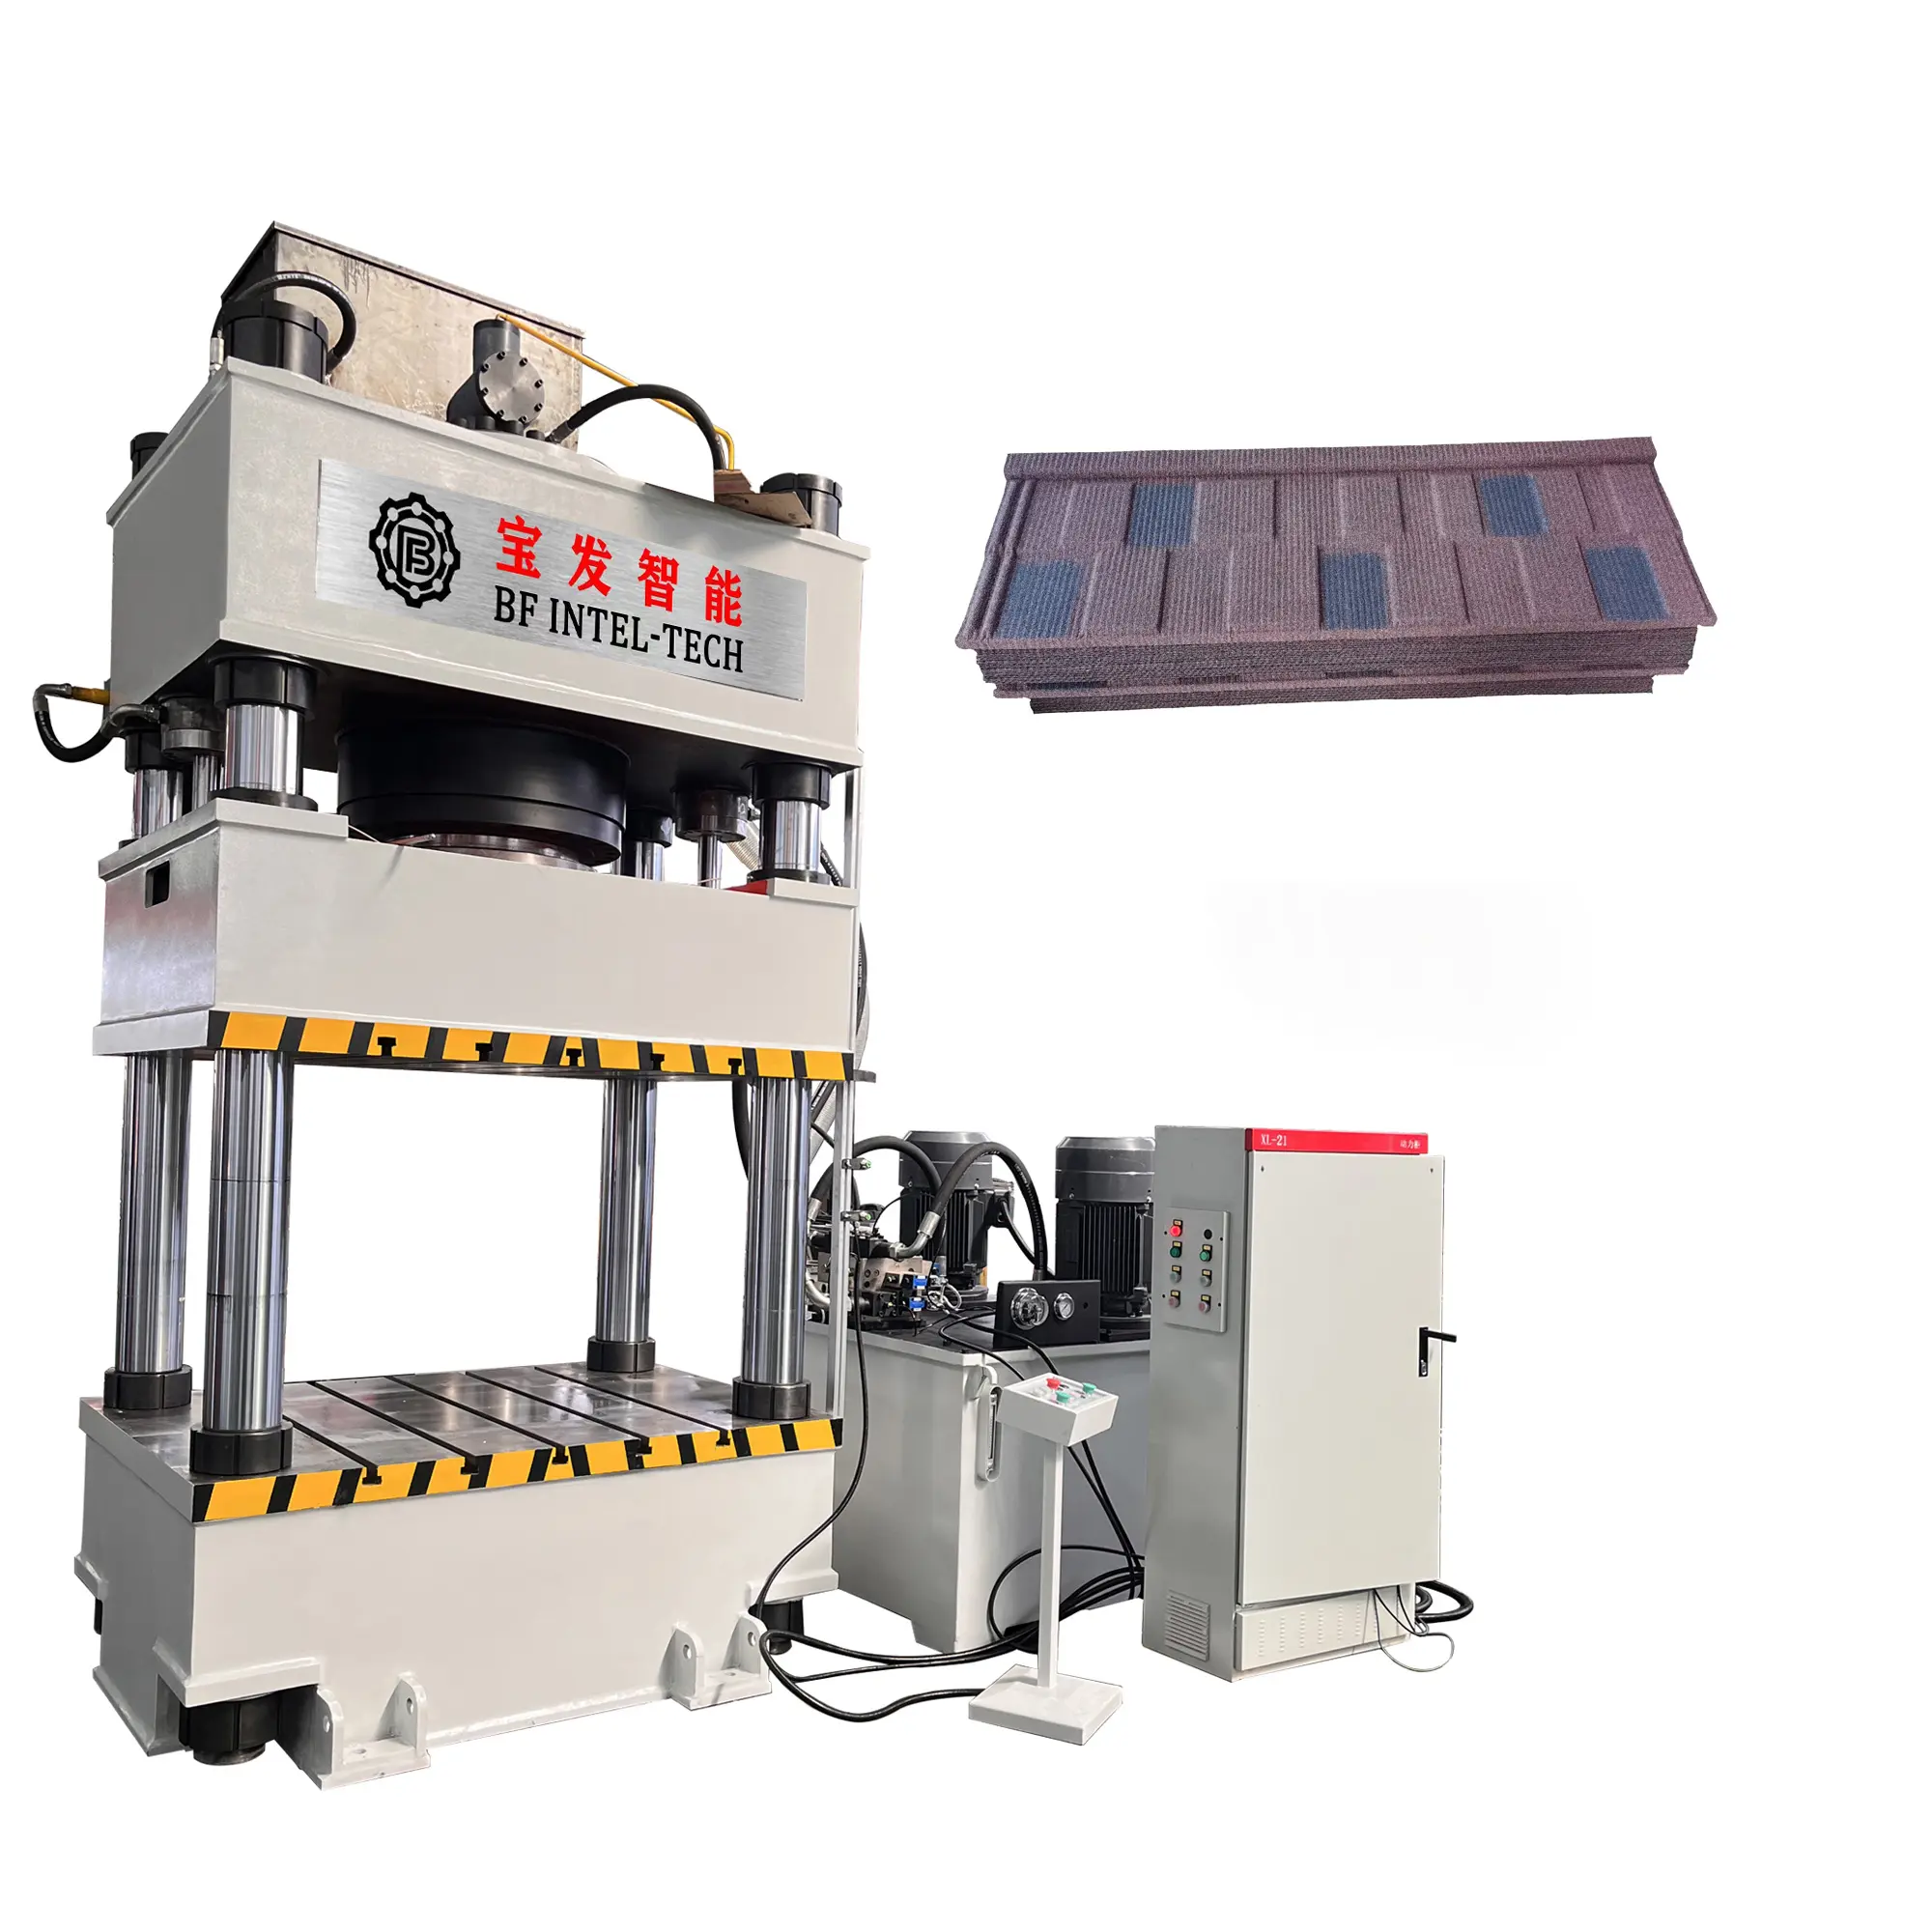 ODM 315T four-column forming building tile hydraulic press